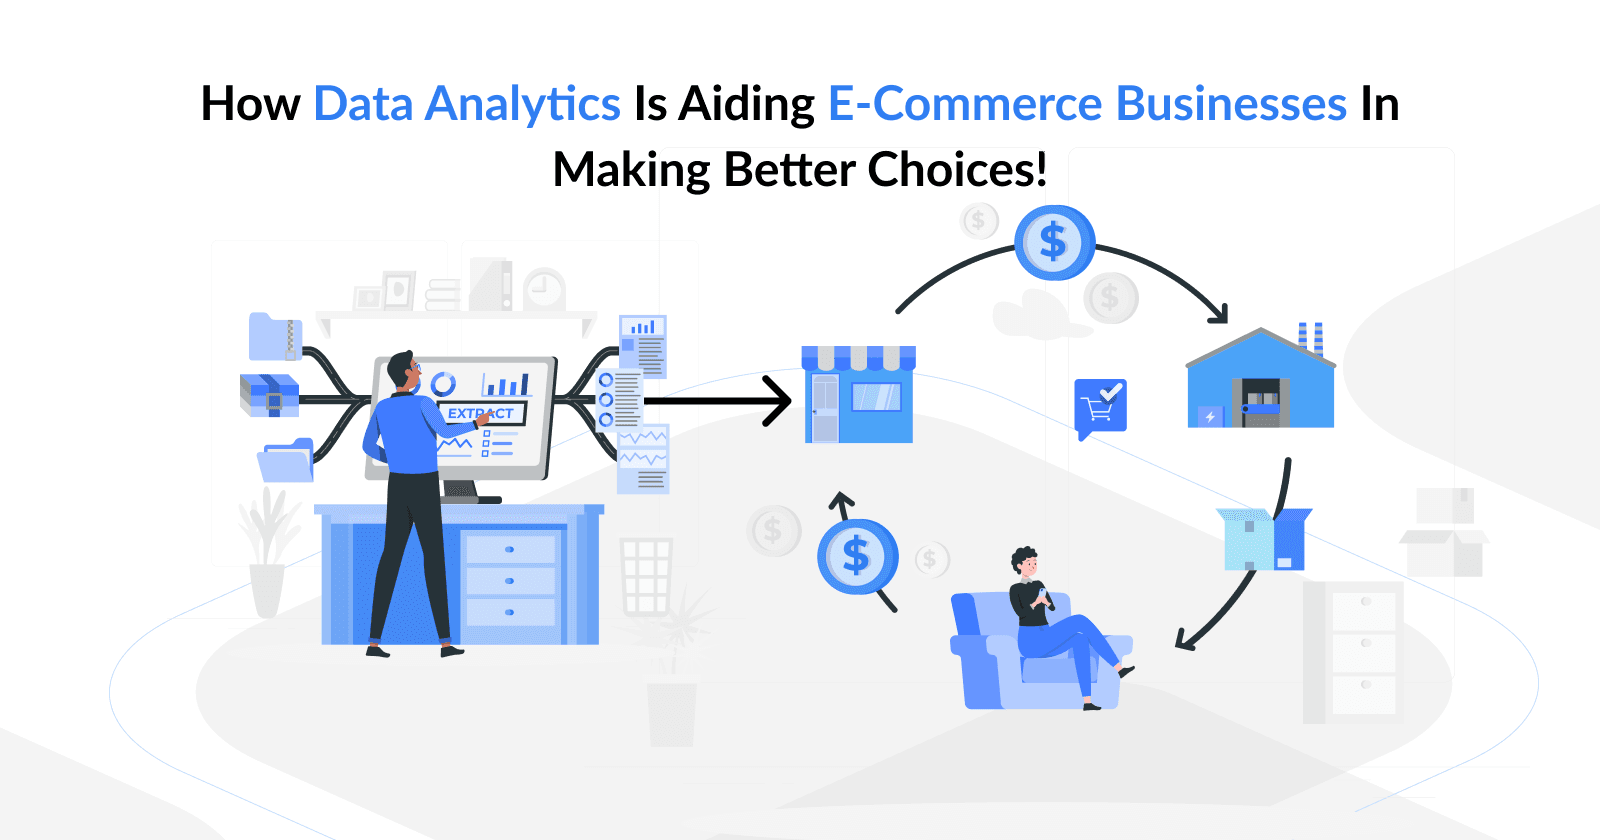 How Data Analytics is Aiding E-Commerce Businesses in Making Better Choices!